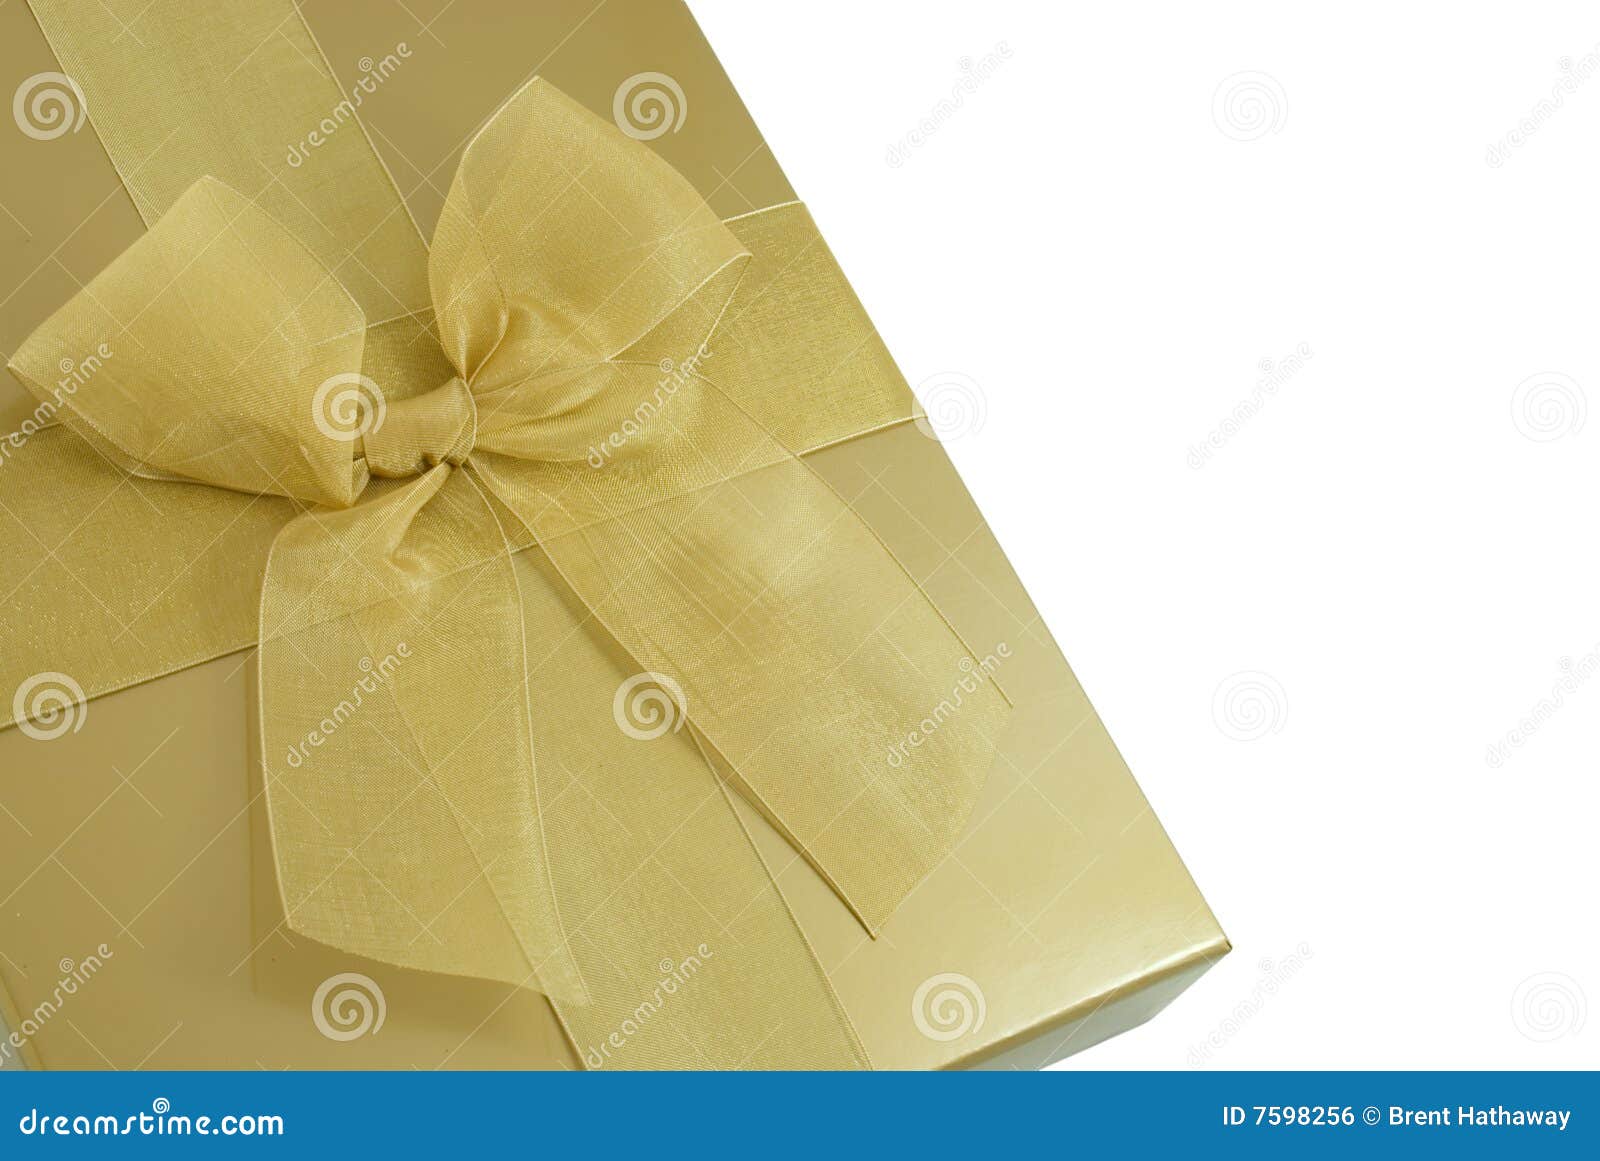 Gold gift box with bow isolated on white